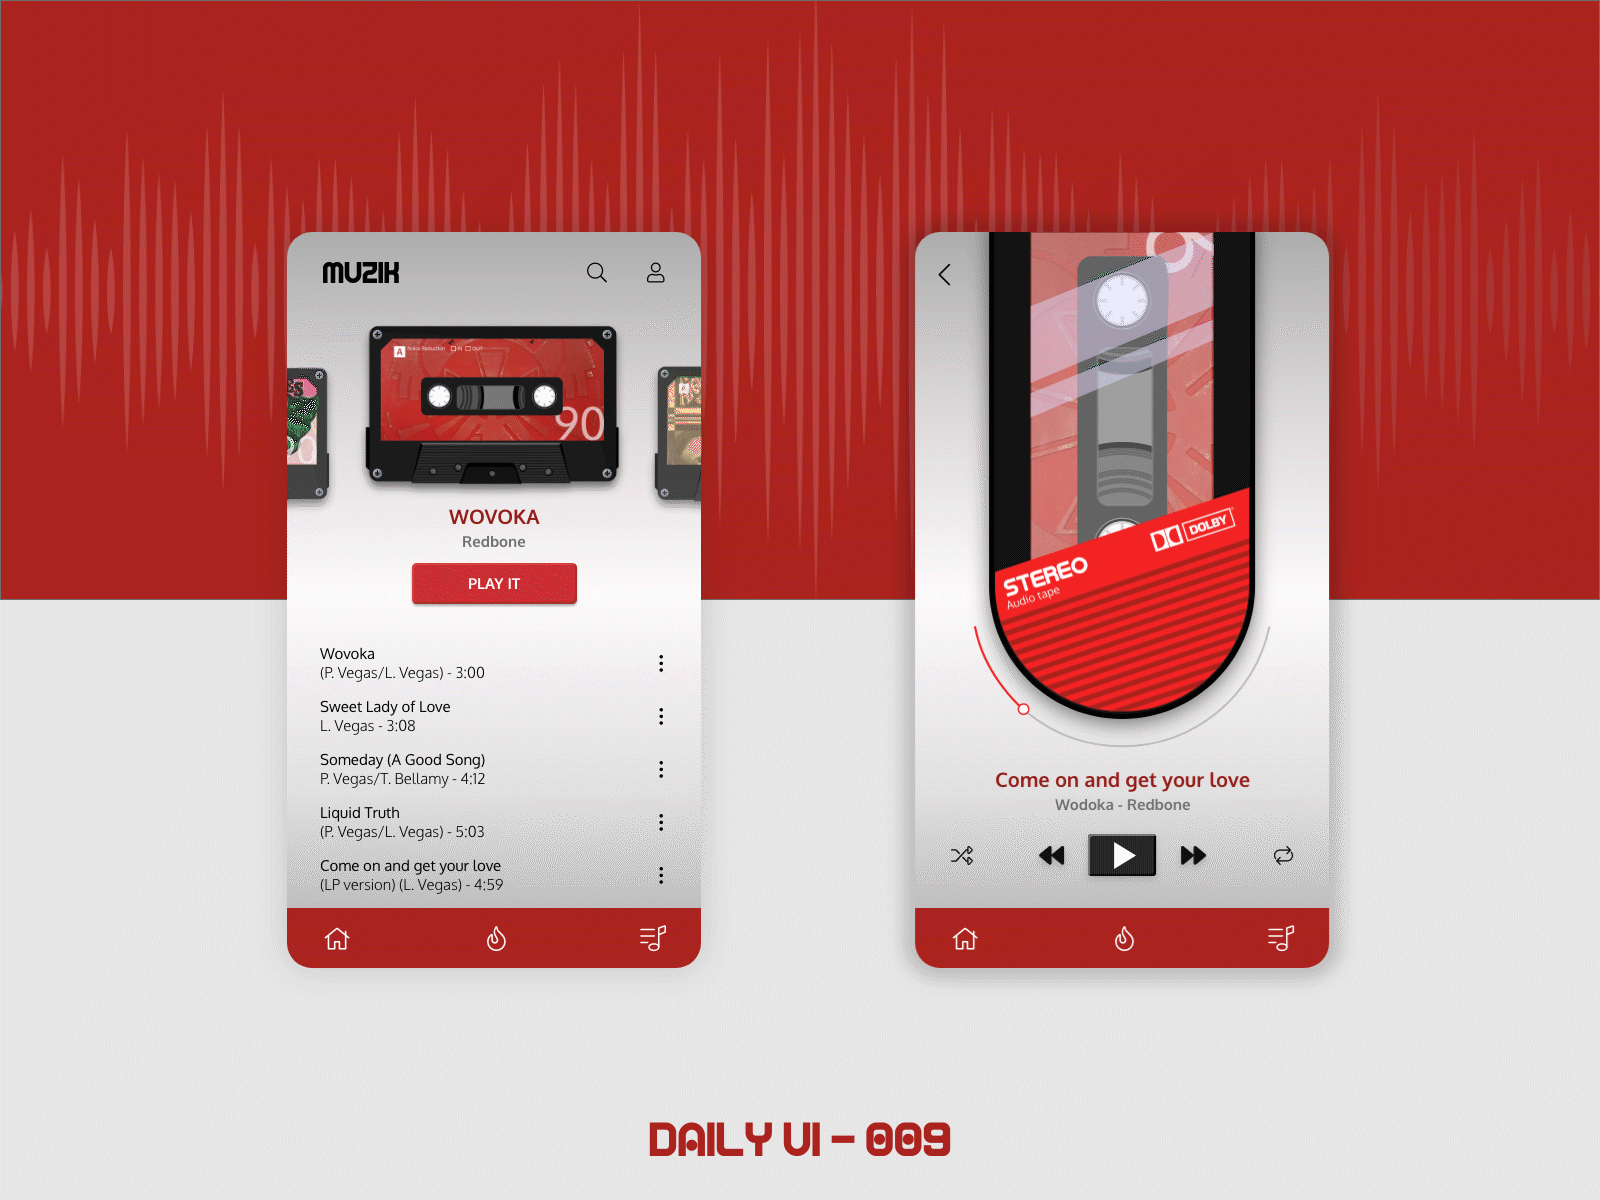 Daily UI - 009 - Audio Player audioplayer daily 100 challenge dailyui dailyui009 dailyuichallenge ui uidesign walkman